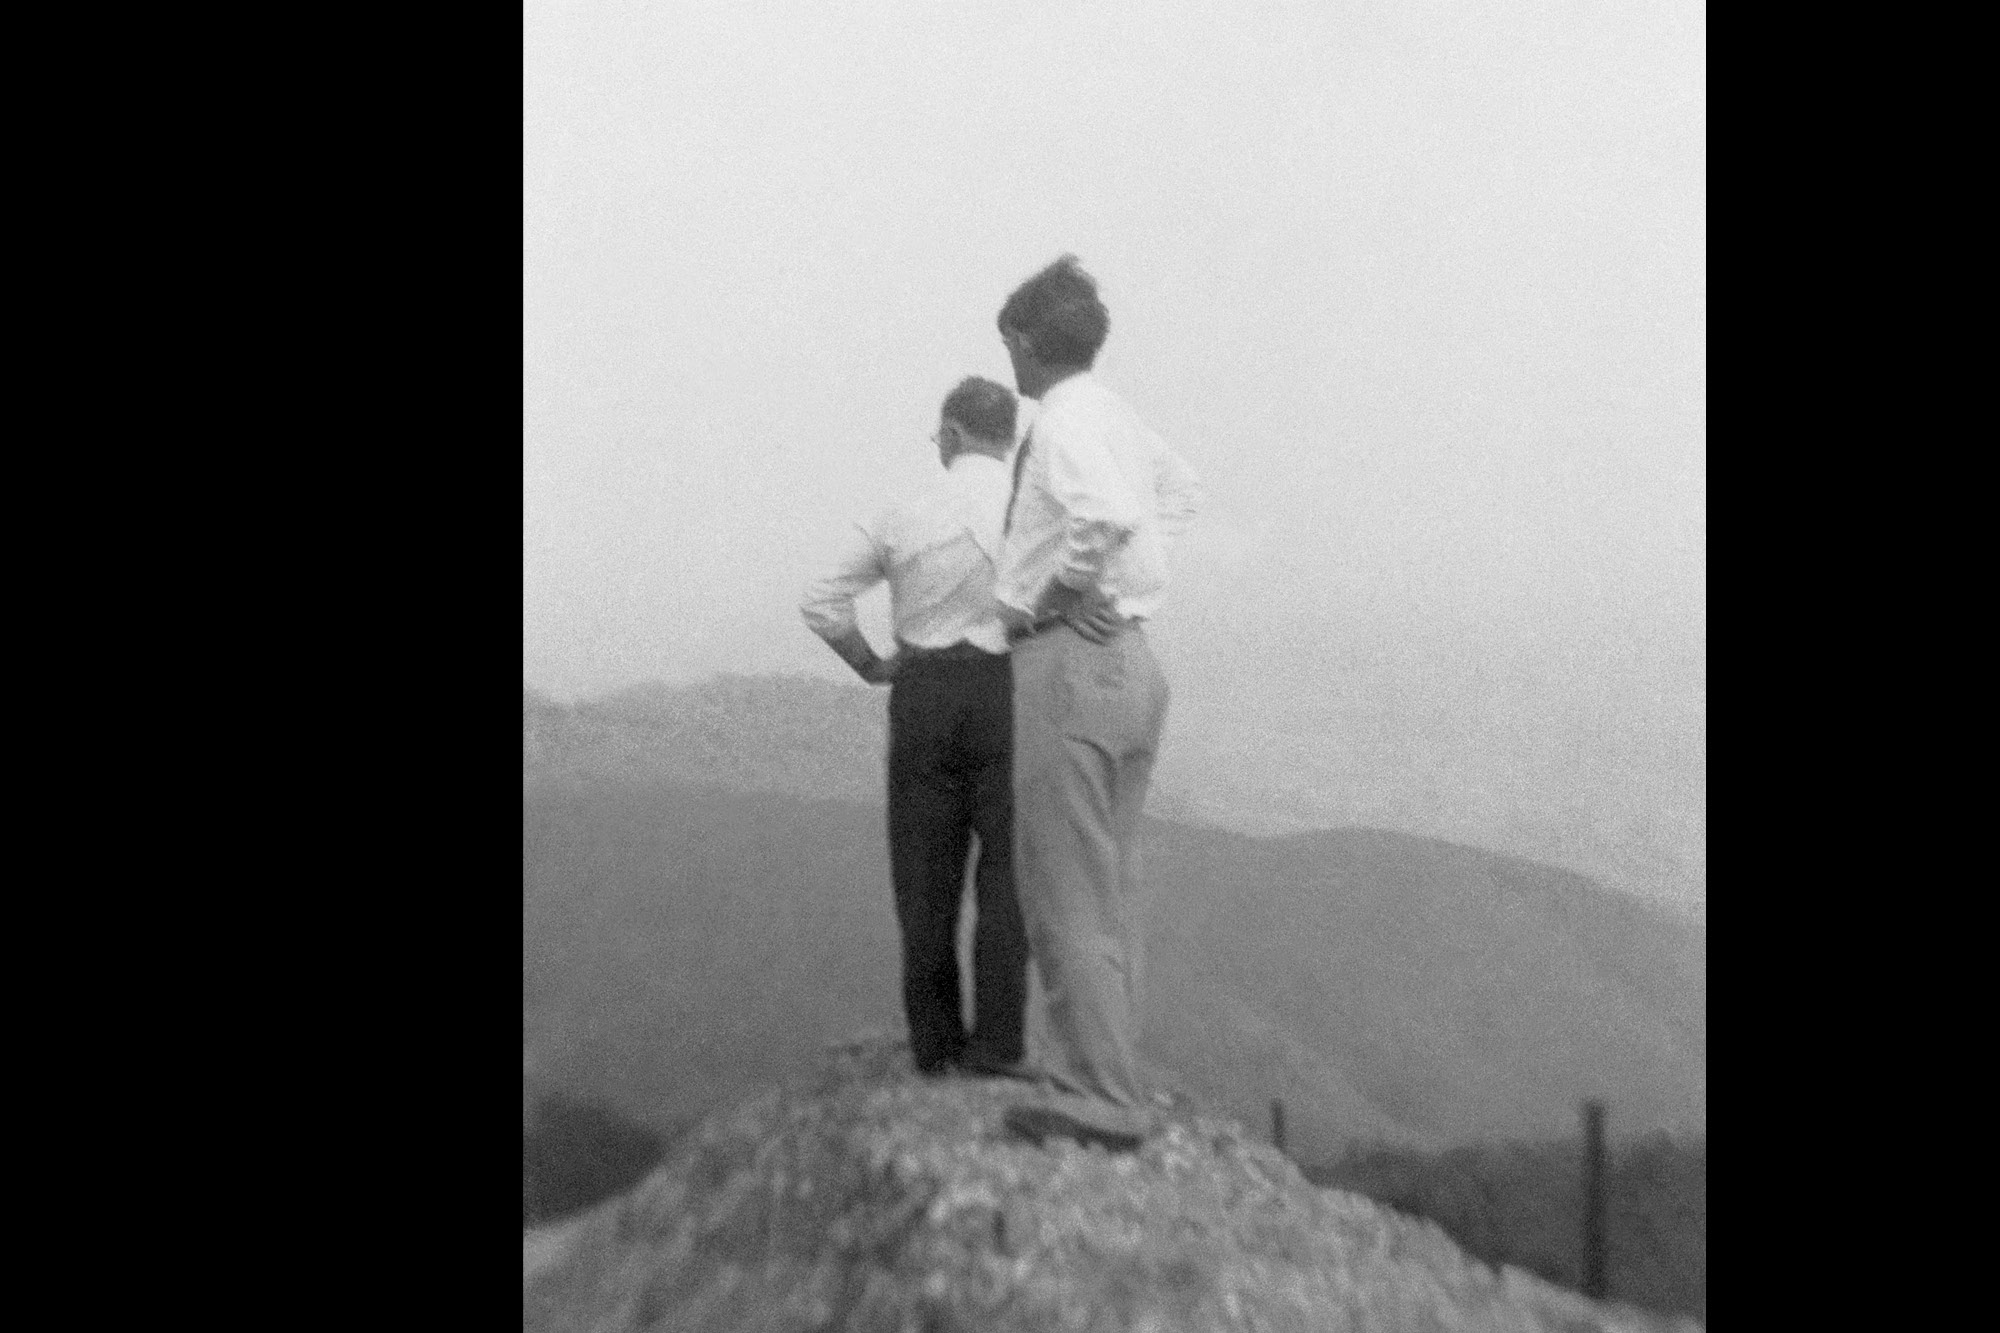 Photograph of two unidentified men looking into the distance.